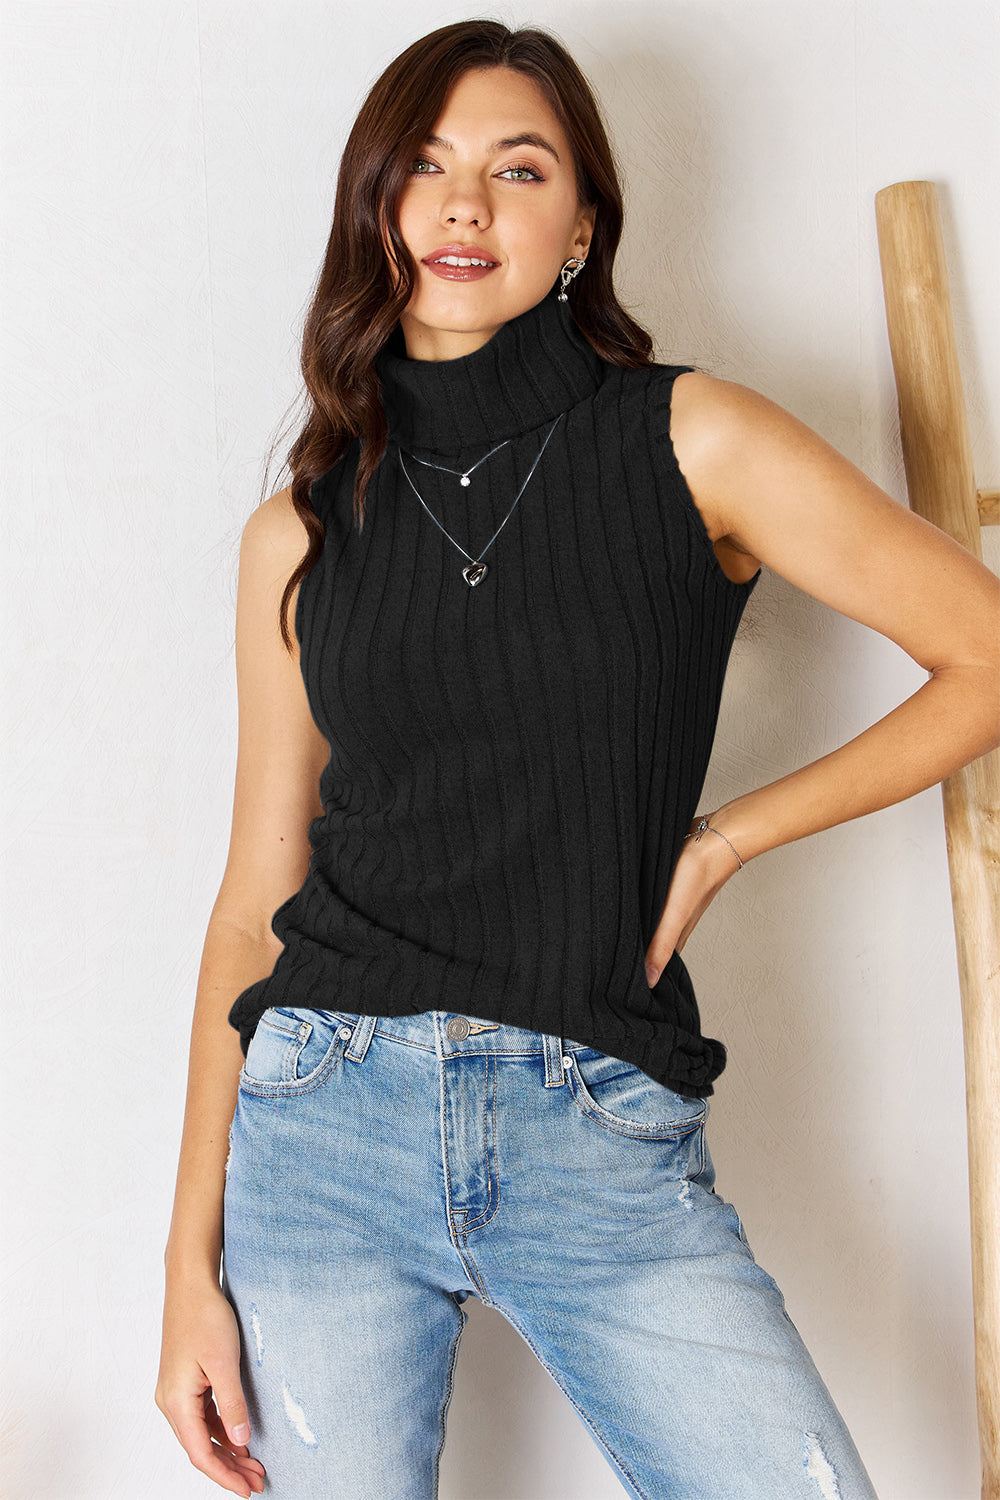 Ribbed Turtleneck Tank Top - Inspired Eye Boutique